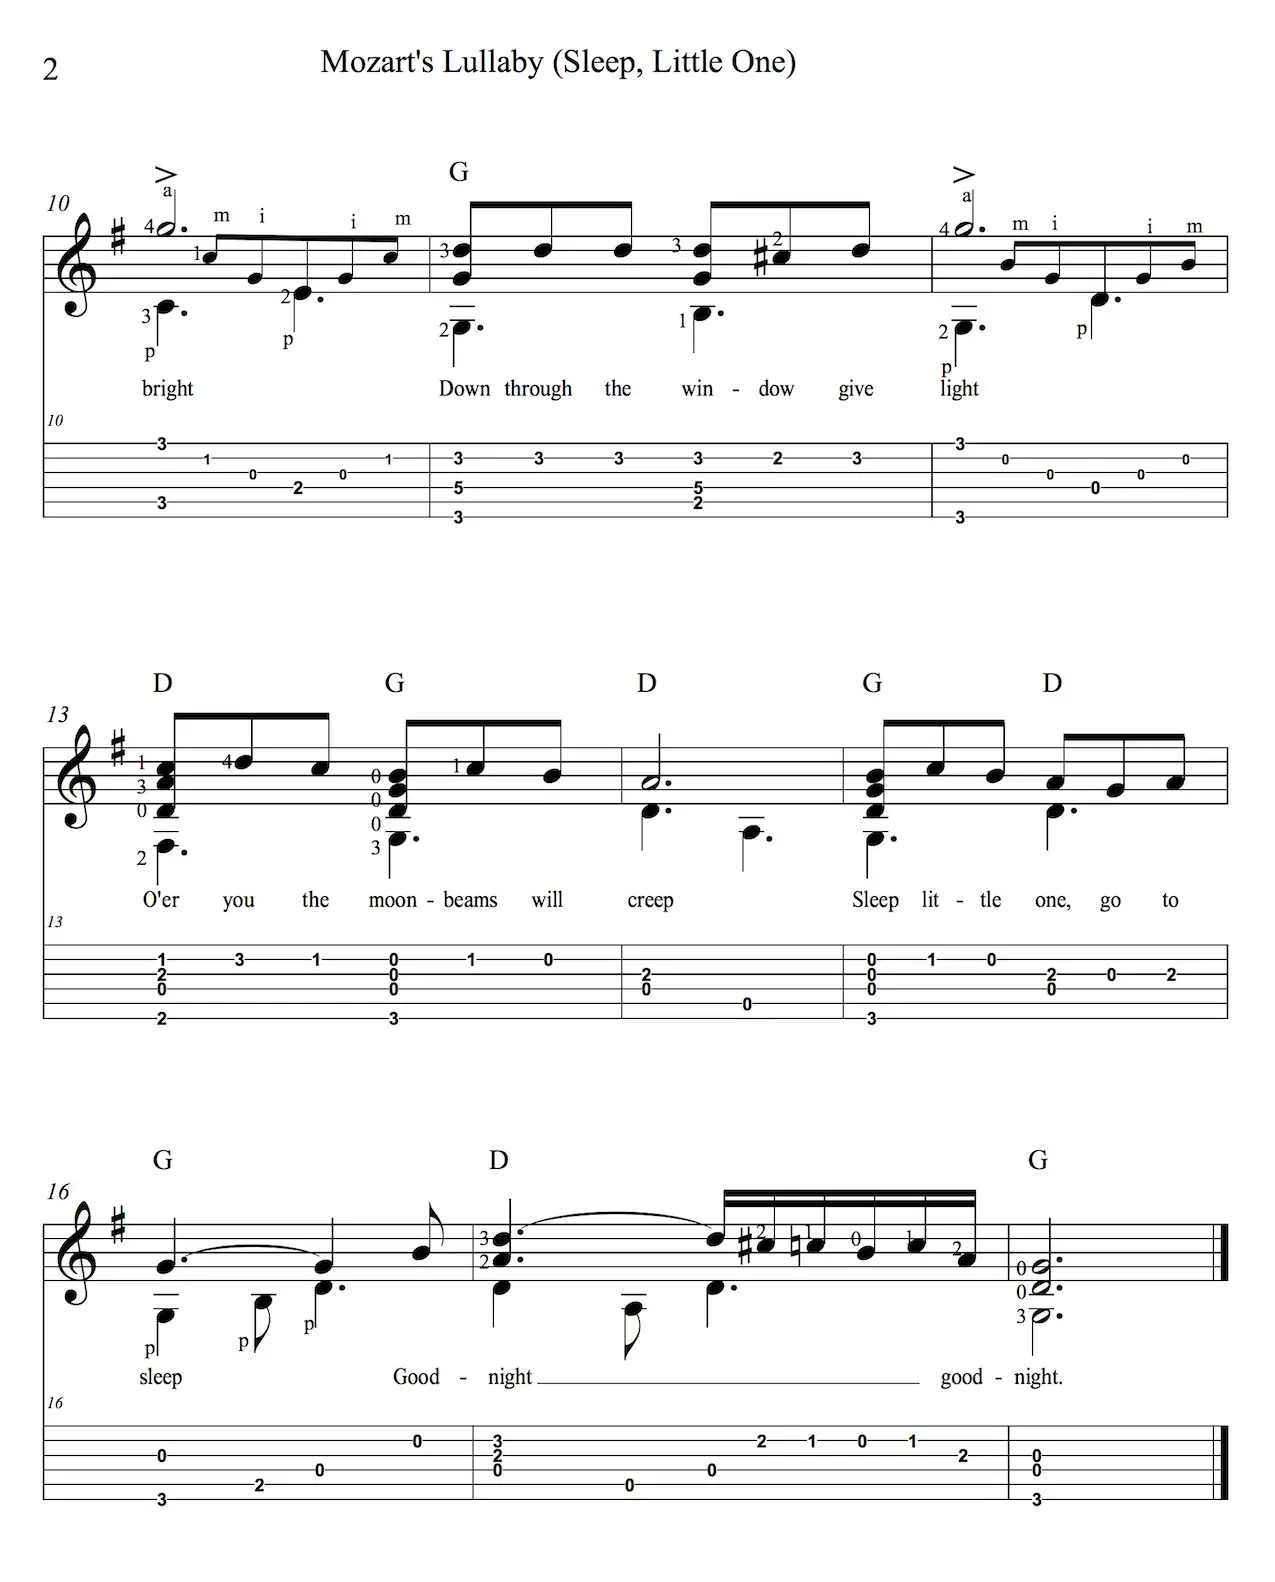 Mozart's Lullaby - Sleep Little One - Easy Guitar Sheet Music with Notes and Tablature page 2.